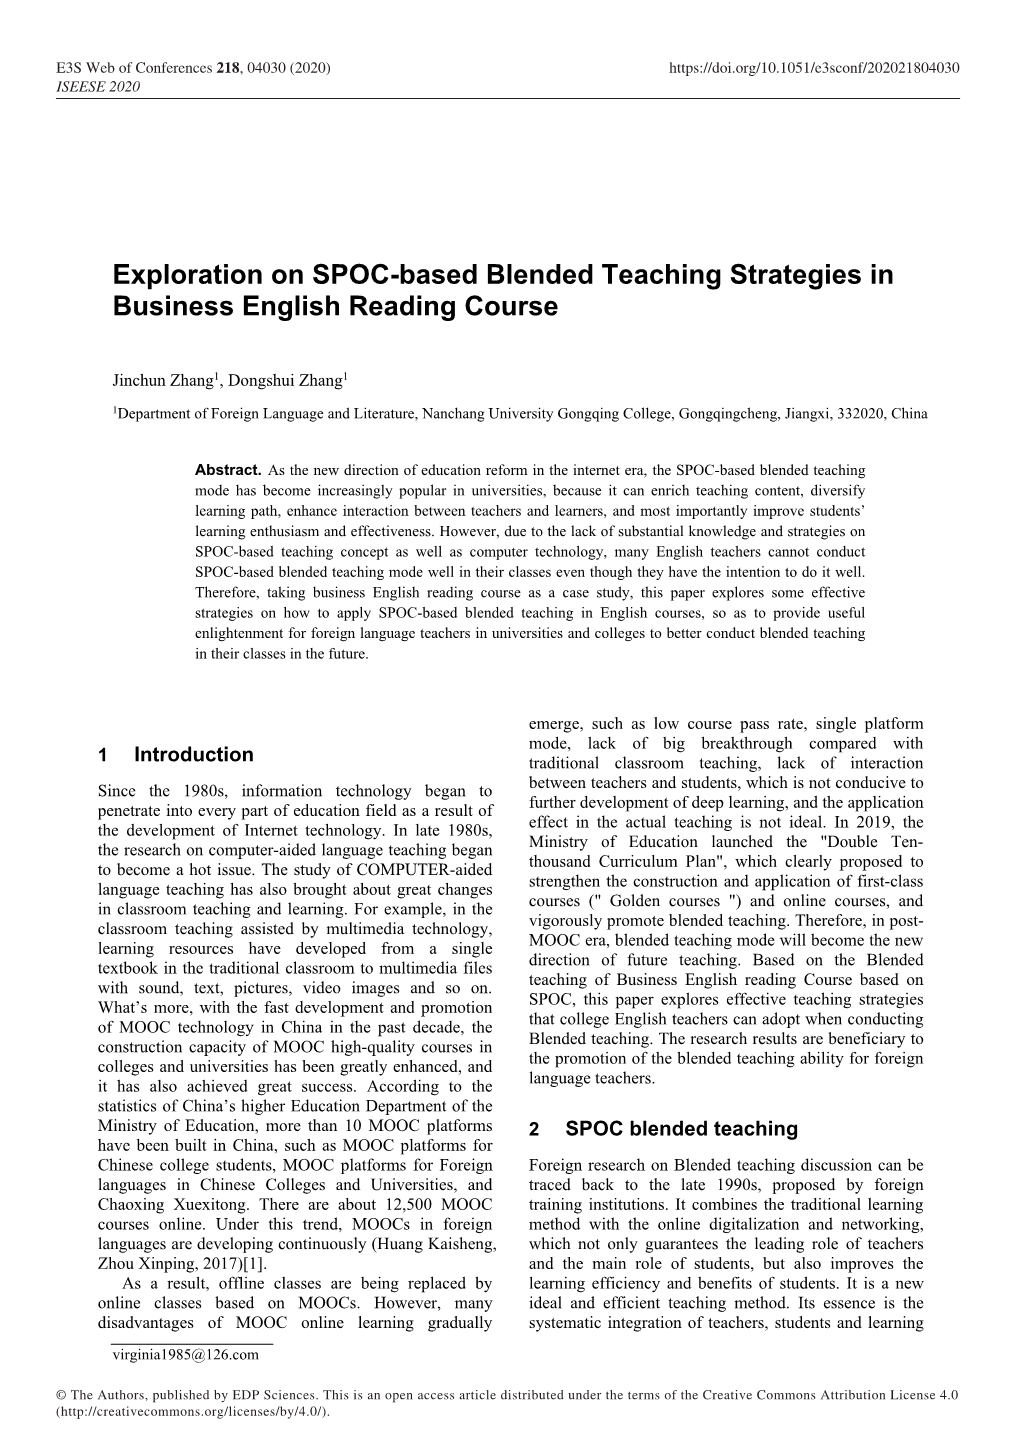 Exploration on SPOC-Based Blended Teaching Strategies in Business English Reading Course